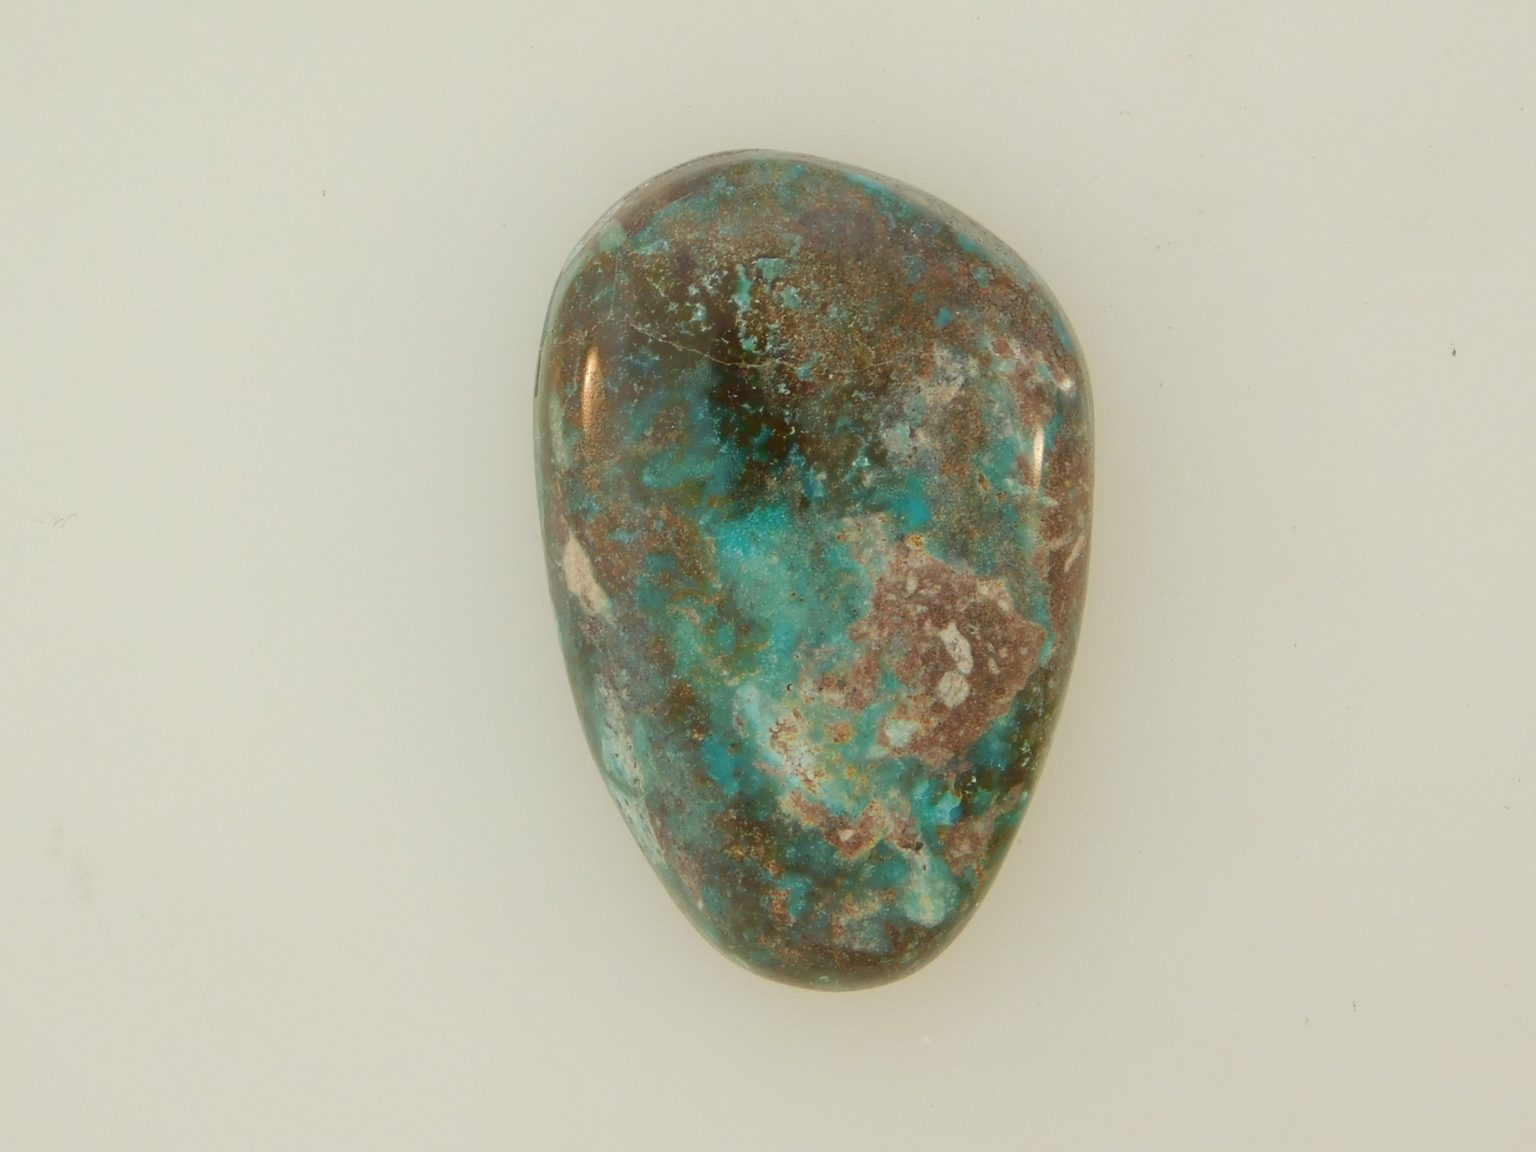 Bisbee Blue Turquoise Chocolate Brown Cabochon 30.5 carats